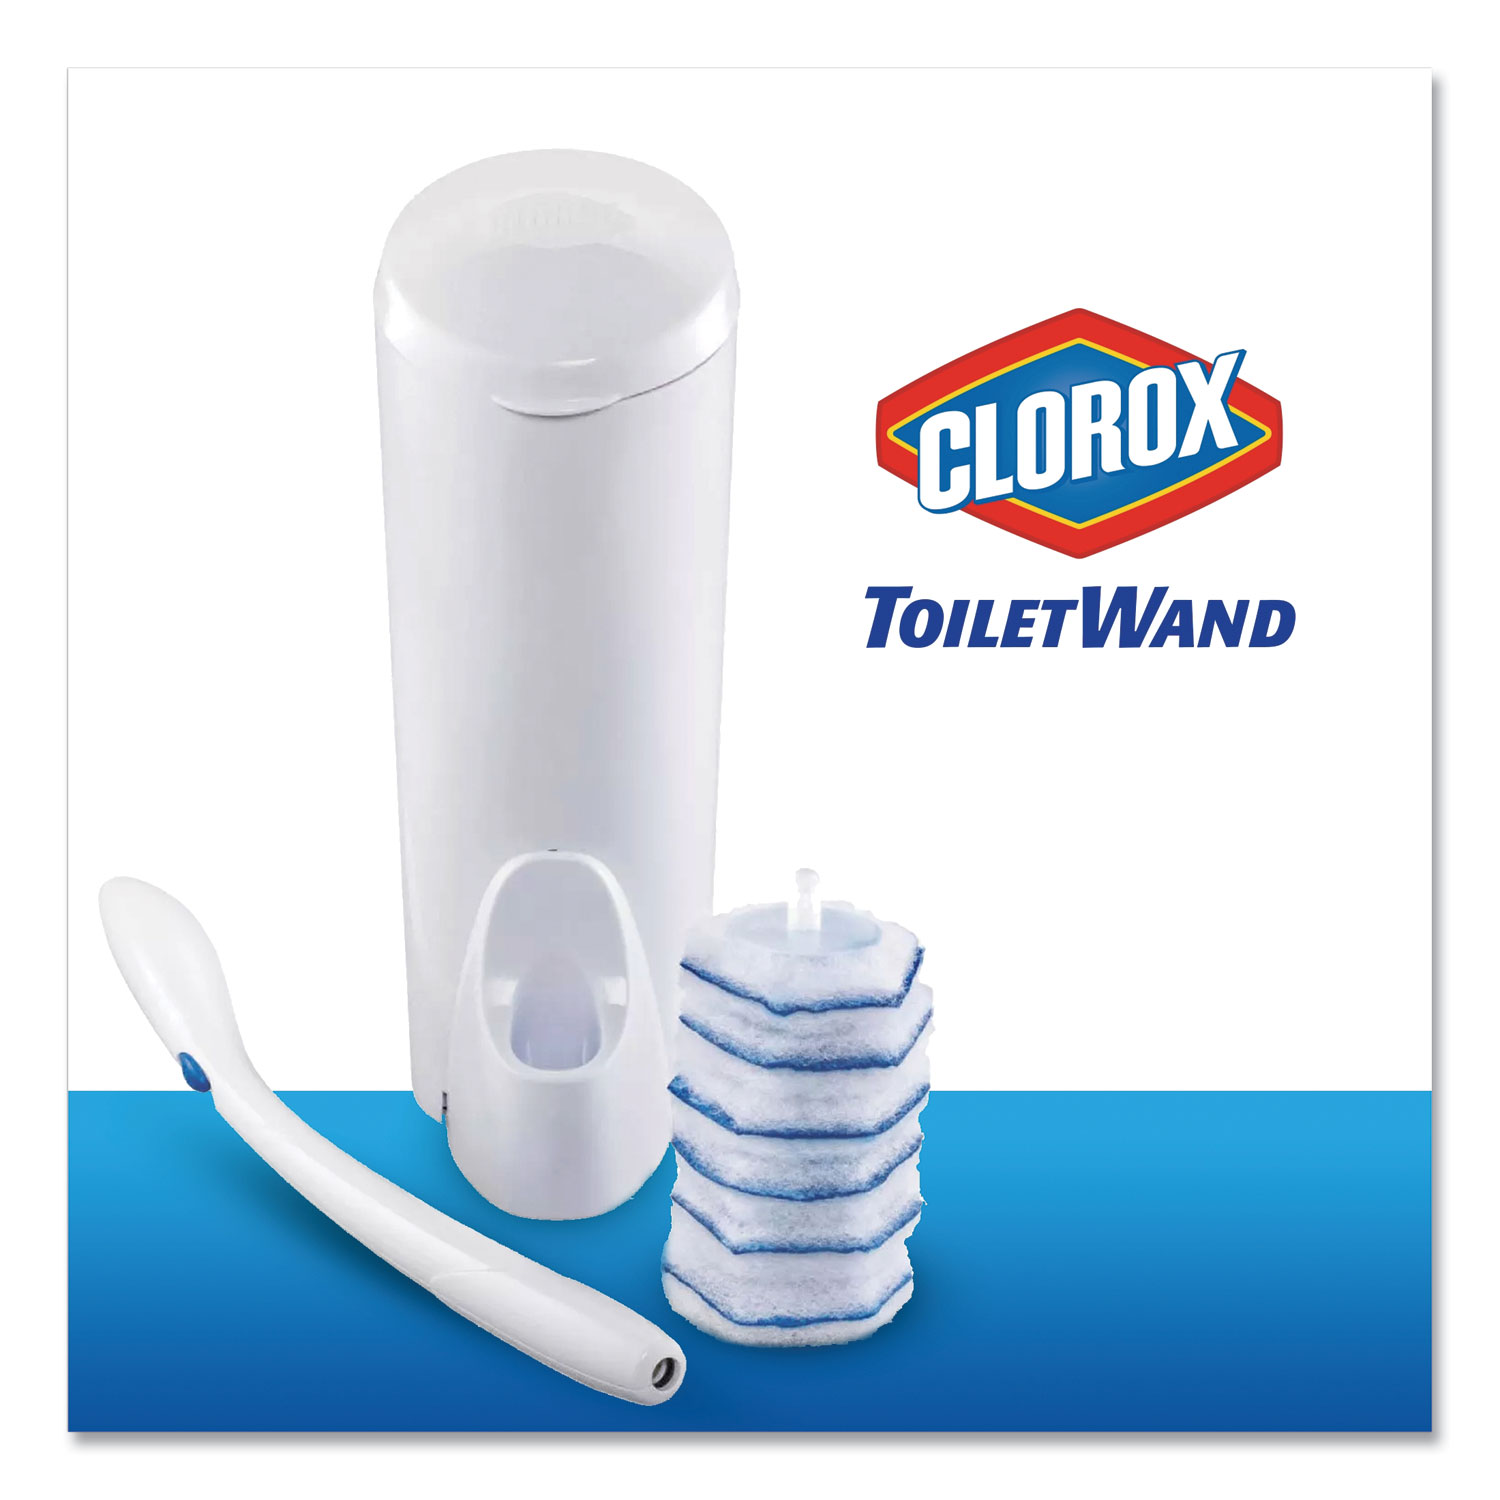  Clorox CLO 03191 Toilet Wand Disposable Toilet Cleaning Kit: Handle, Caddy & Refills, 6/Carton (CLO03191CT) 